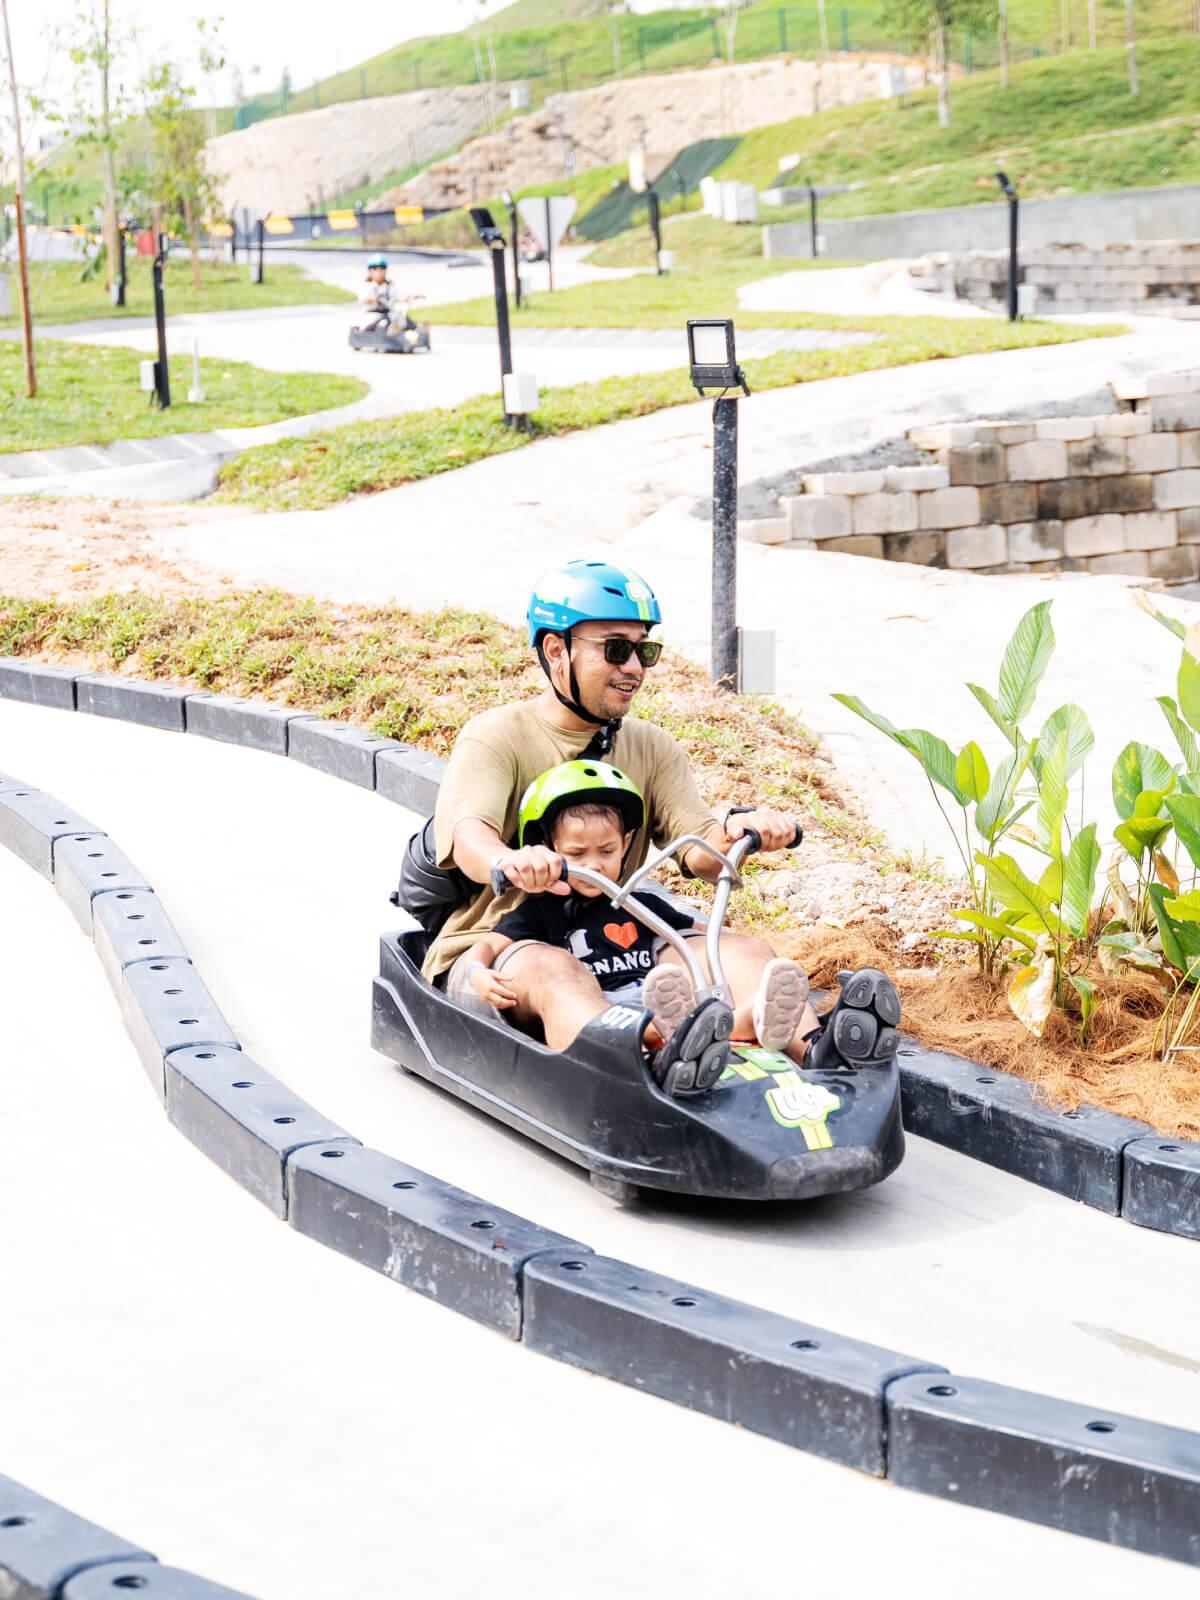 A father finishes a Luge ride with his son in the same cart.